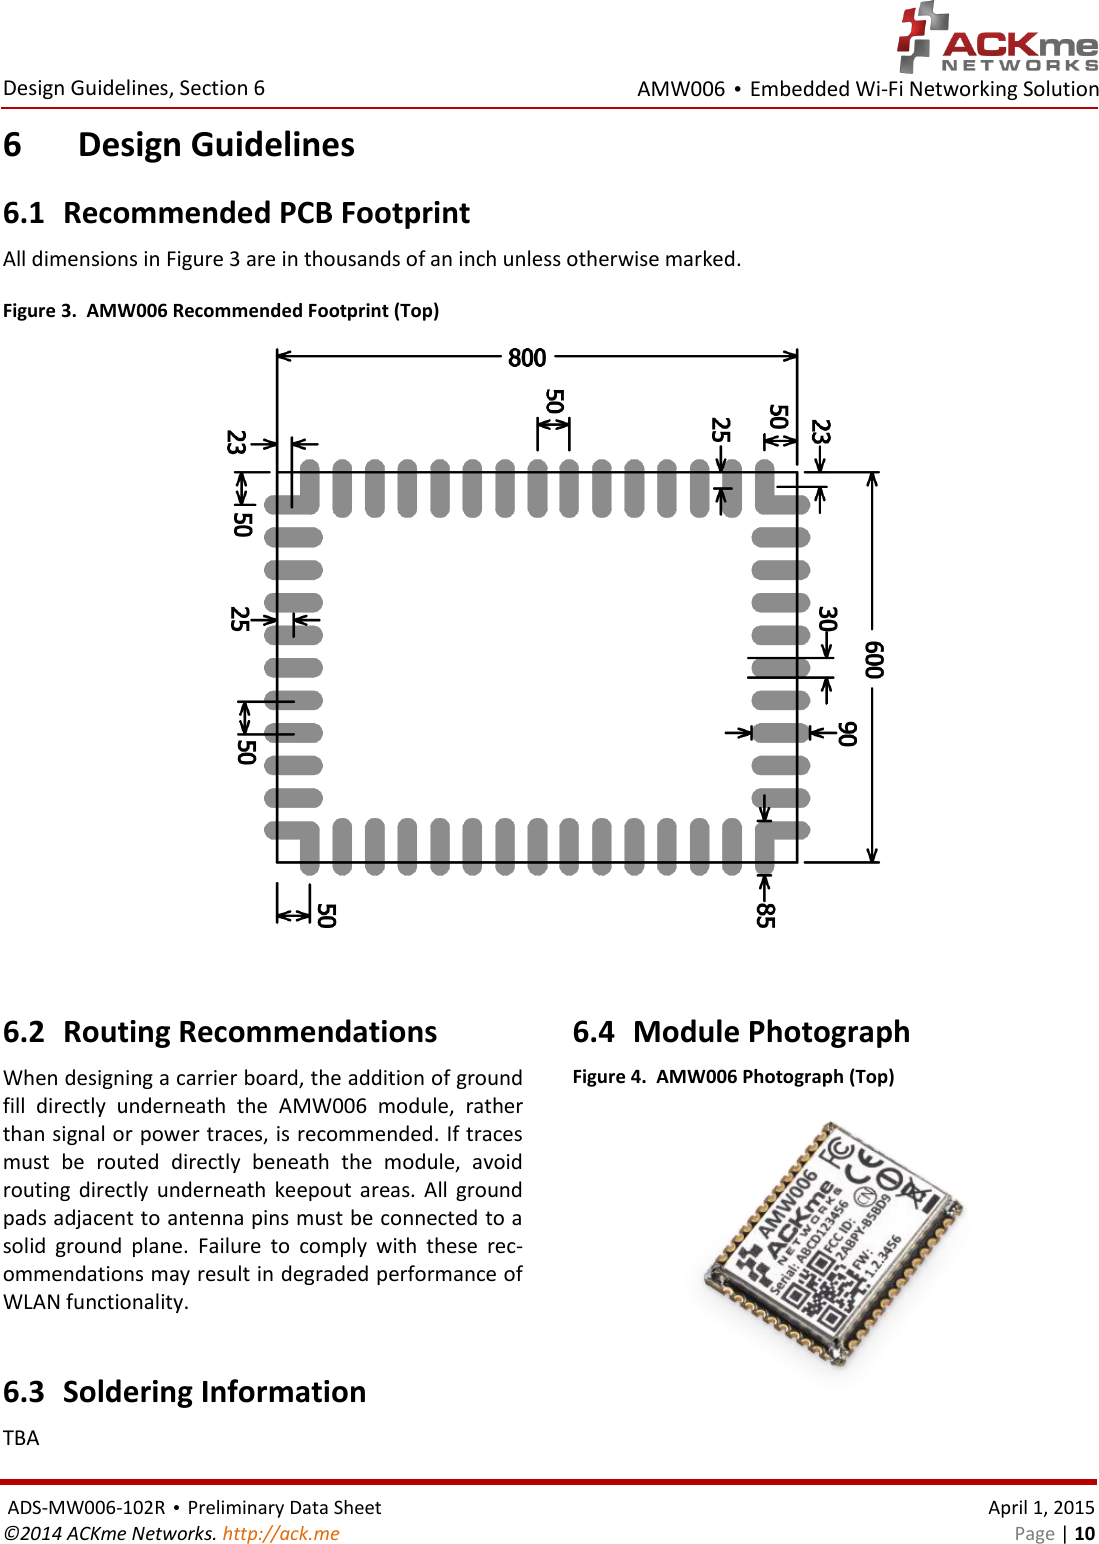 AMW006 • Embedded Wi-Fi Networking Solution  Design Guidelines, Section 6  ADS-MW006-102R • Preliminary Data Sheet    April 1, 2015 ©2014 ACKme Networks. http://ack.me    Page | 10 6 Design Guidelines 6.1 Recommended PCB Footprint All dimensions in Figure 3 are in thousands of an inch unless otherwise marked. Figure 3.  AMW006 Recommended Footprint (Top)   6.2 Routing Recommendations When designing a carrier board, the addition of ground fill  directly  underneath  the  AMW006  module,  rather than signal or power traces, is recommended. If traces must  be  routed  directly  beneath  the  module,  avoid routing  directly  underneath  keepout  areas.  All  ground pads adjacent to antenna pins must be connected to a solid  ground  plane.  Failure  to  comply  with  these  rec-ommendations may result in degraded performance of WLAN functionality.   6.3 Soldering Information TBA  6.4 Module Photograph Figure 4.  AMW006 Photograph (Top)   